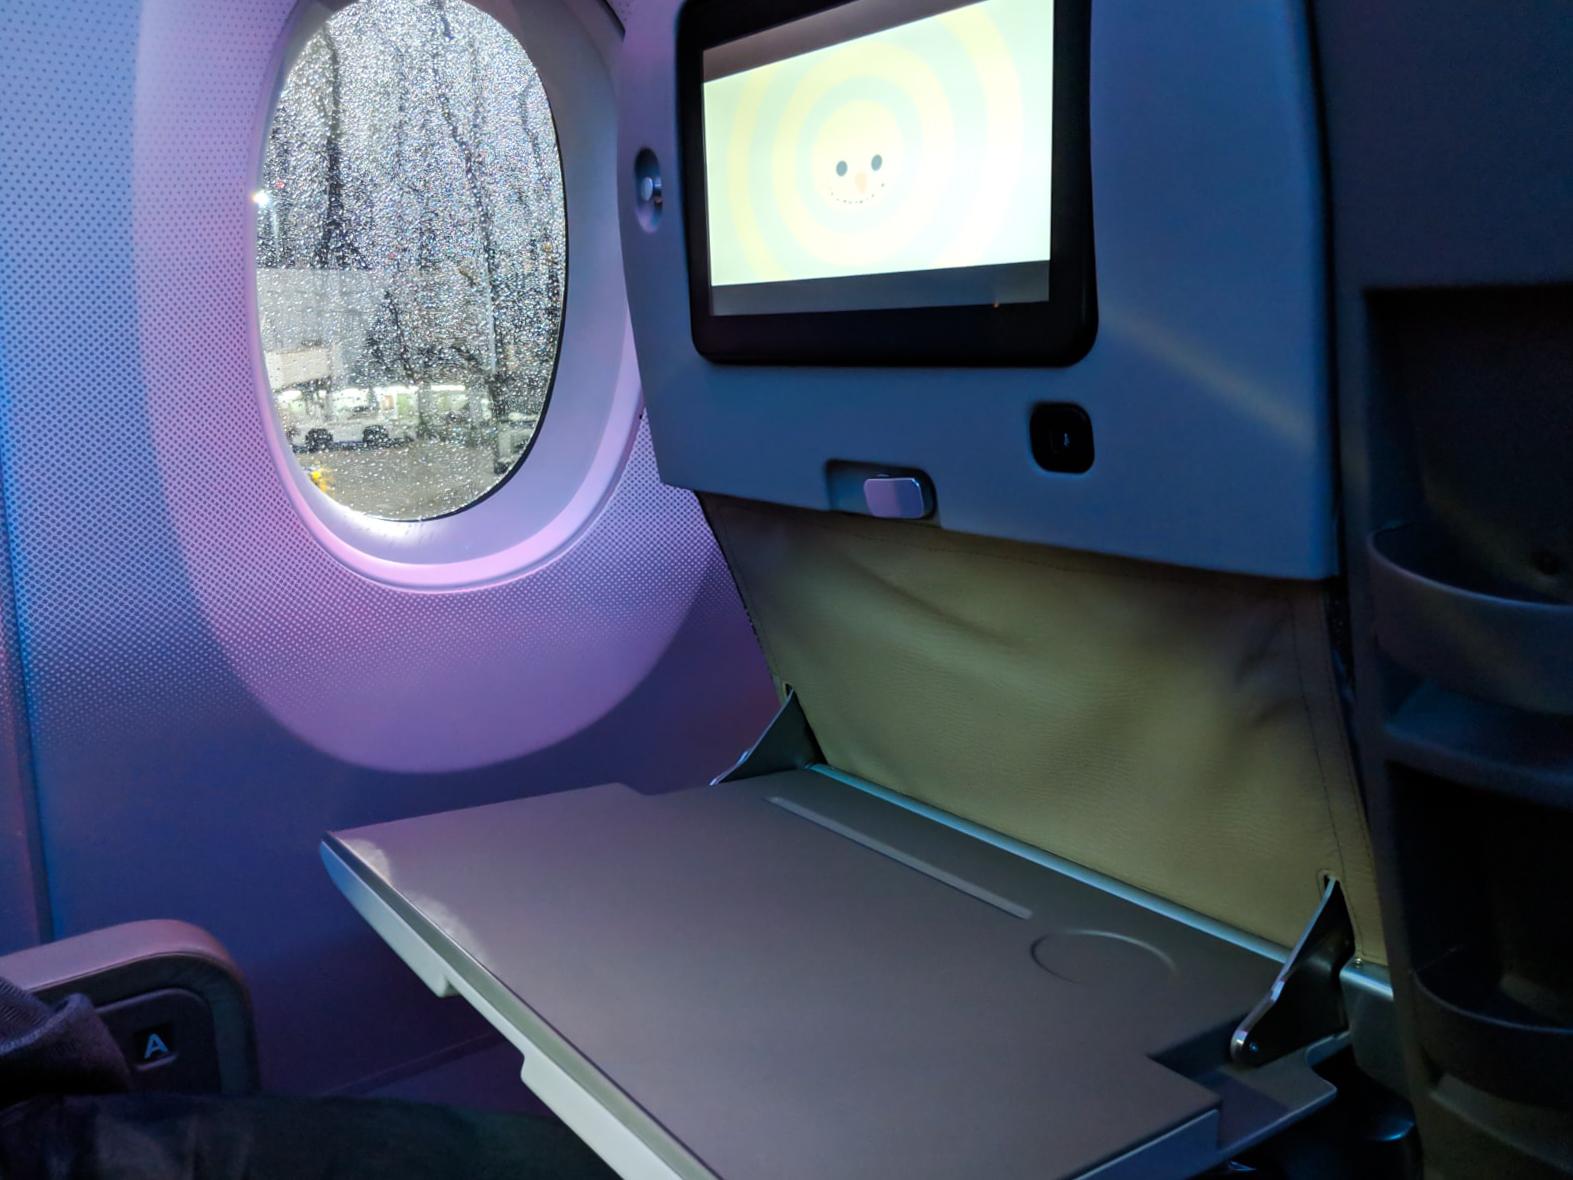 China Airlines Premium Economy tray table